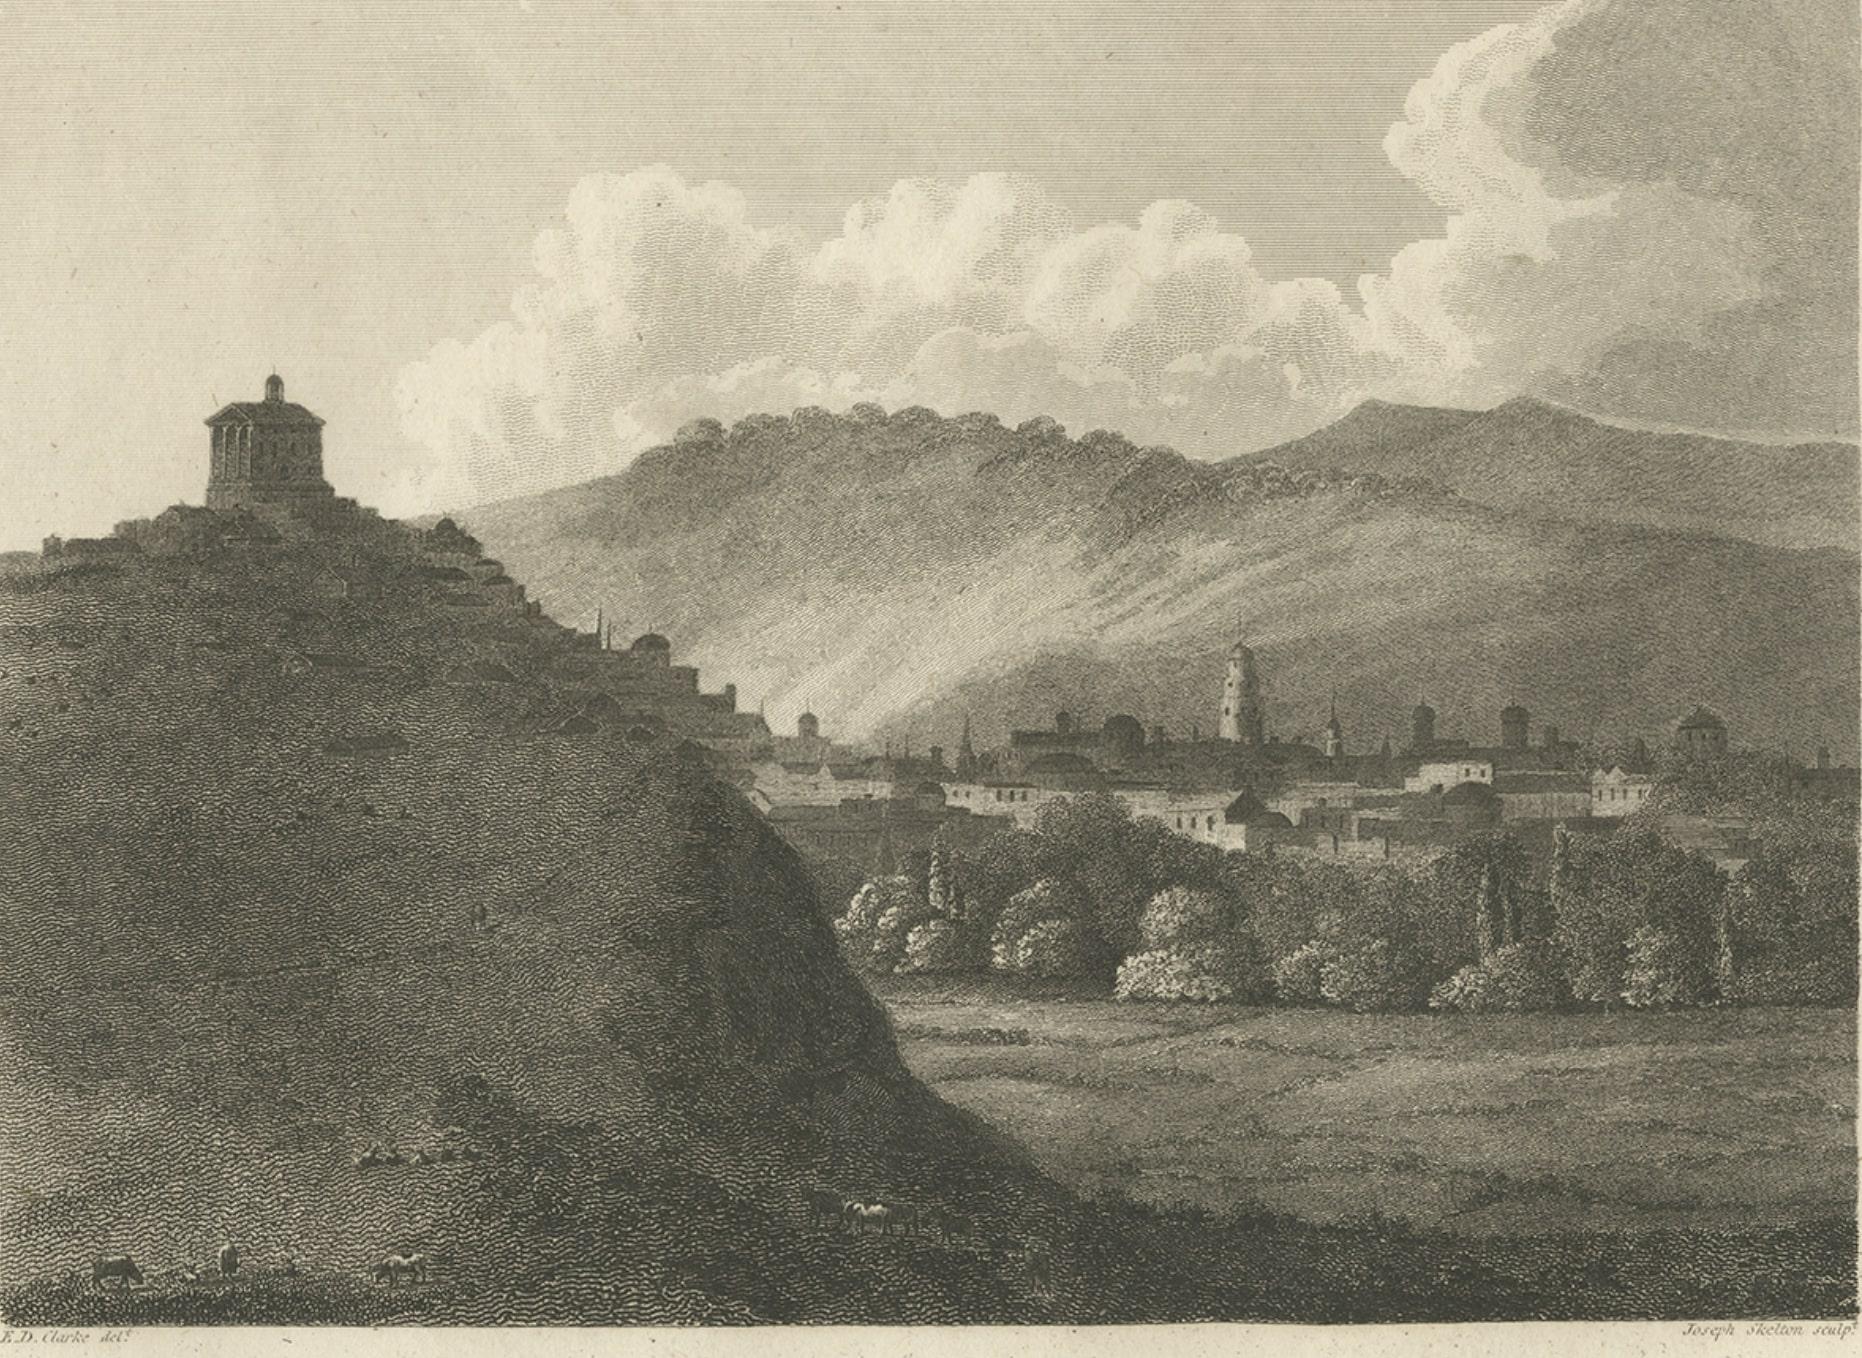 Antique print titled 'View of Tula, the Sheffield of Russia, in the approach from Moscow'. View of Tula, Russia. This print originates from 'Travels in Various Countries of Europe, Asia and Africa' by Edward Daniel Clarke.

Original antique